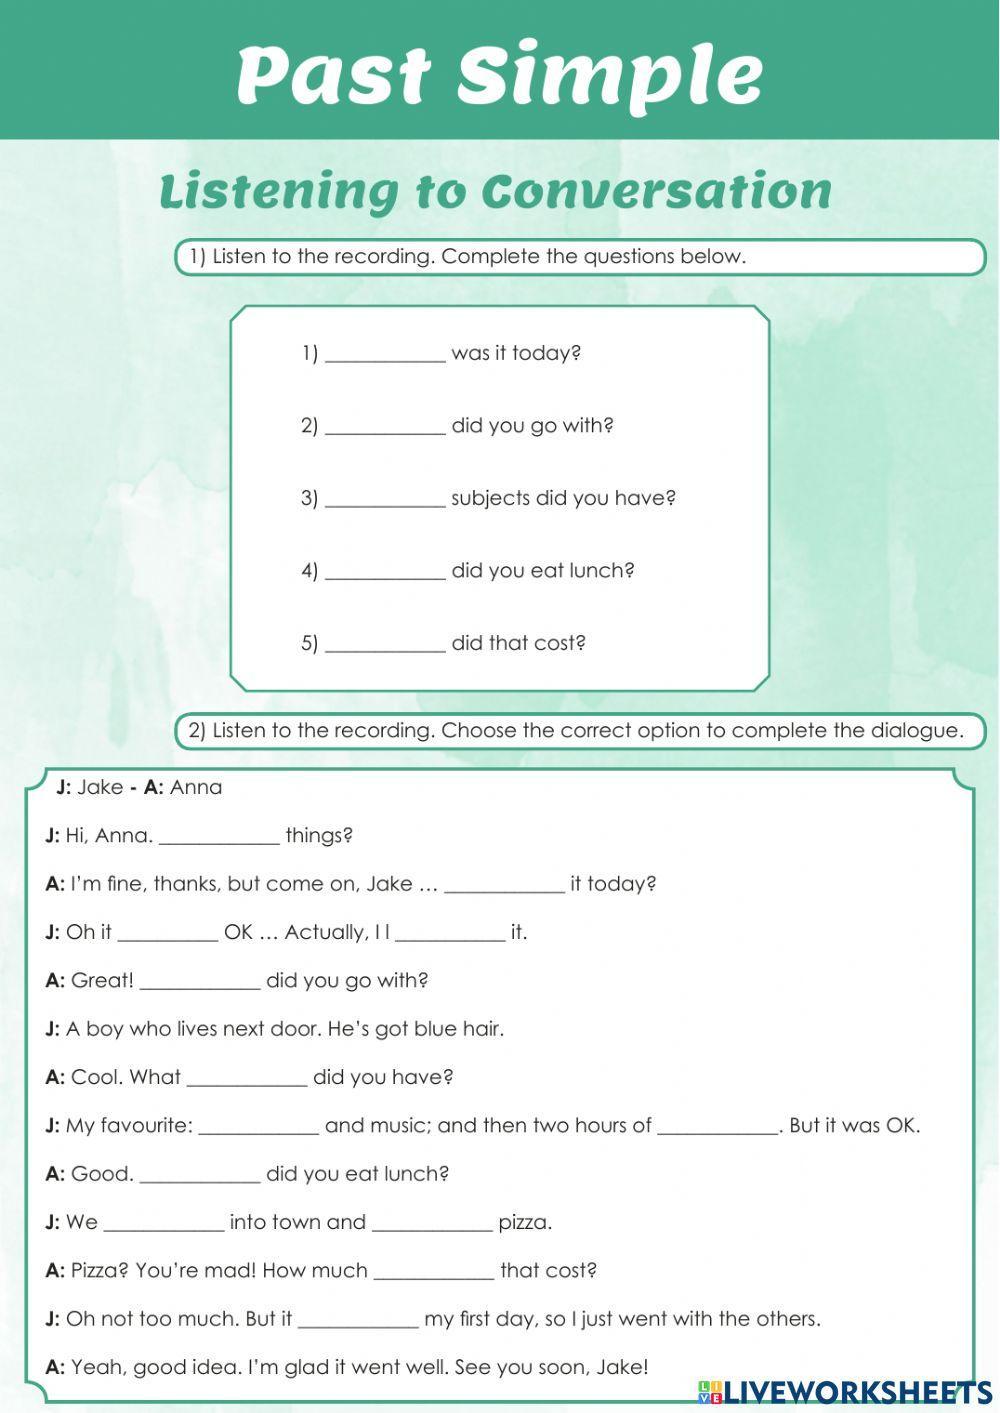 Past Simple - Listening to Conversations worksheet | Live Worksheets